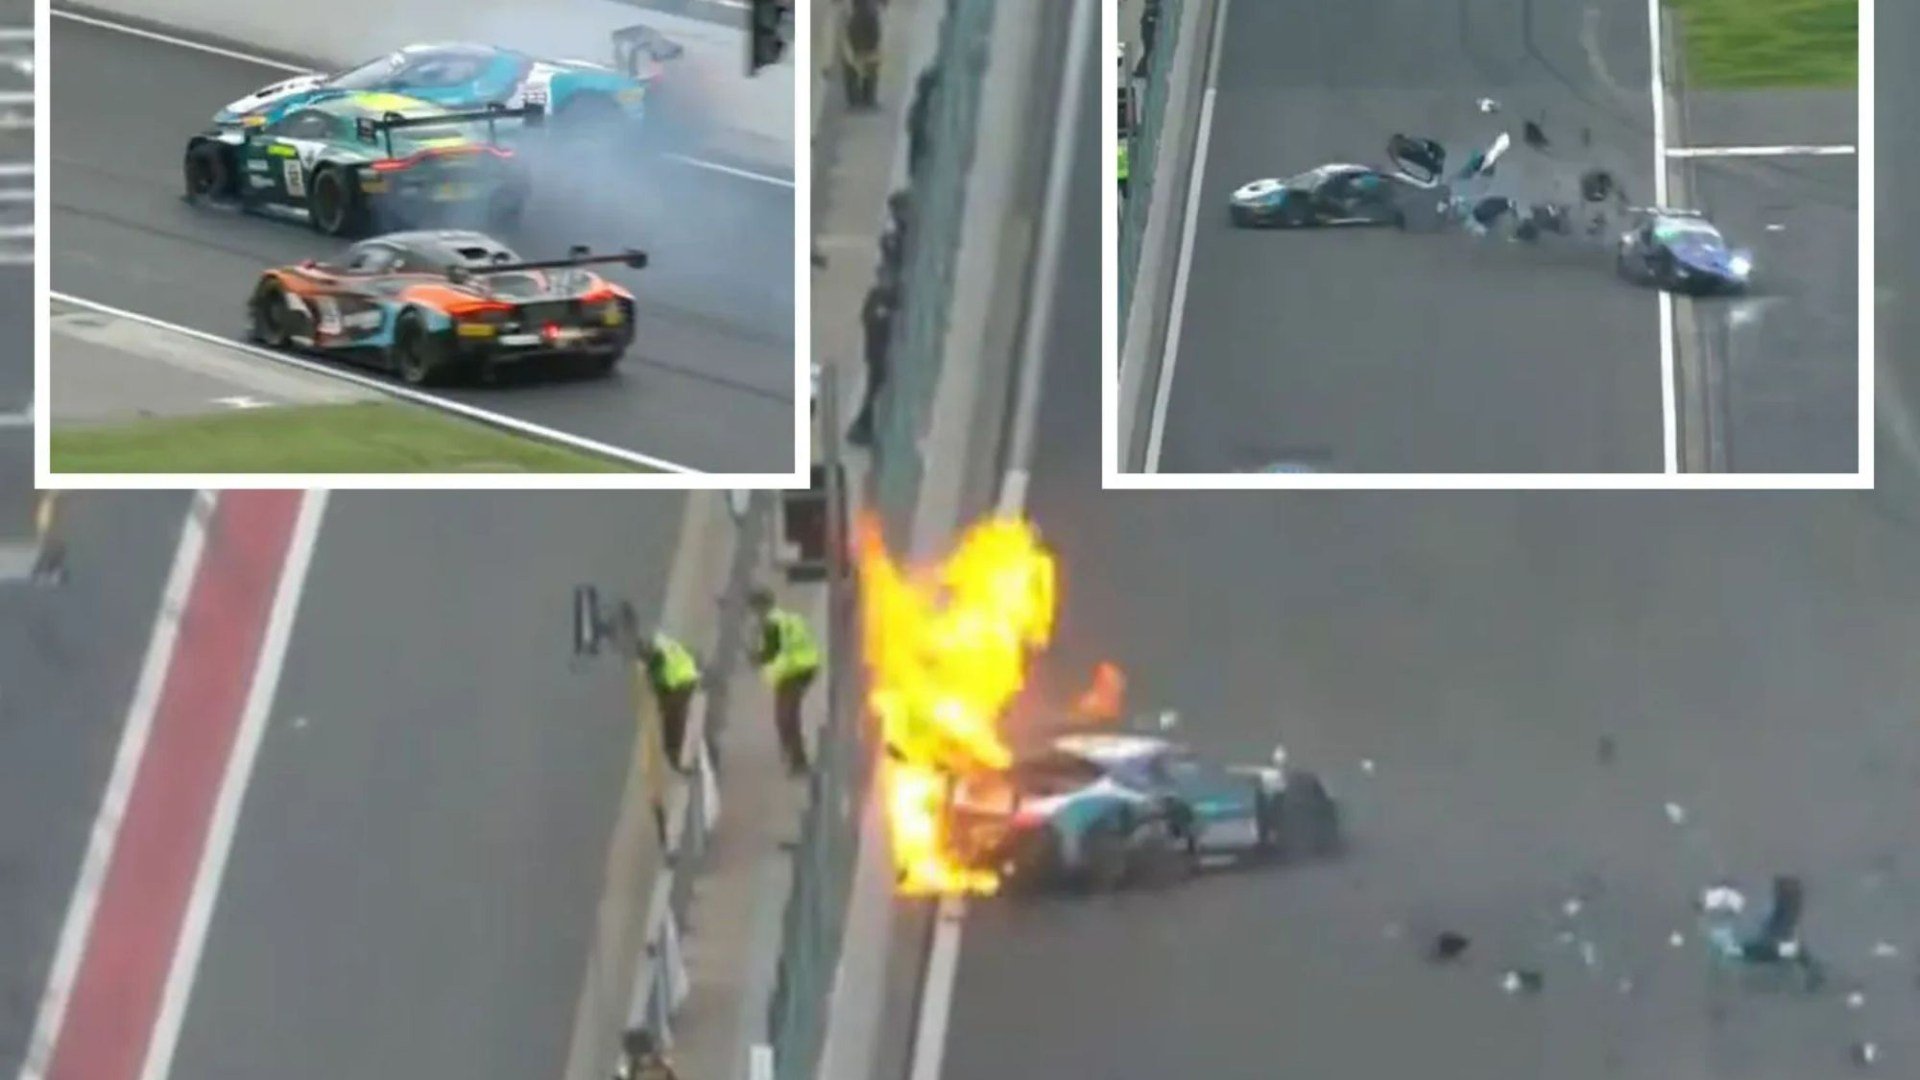 Terrifying moment race car bursts into flame after rival smashes into it in 125mph horror crash as stewards flee